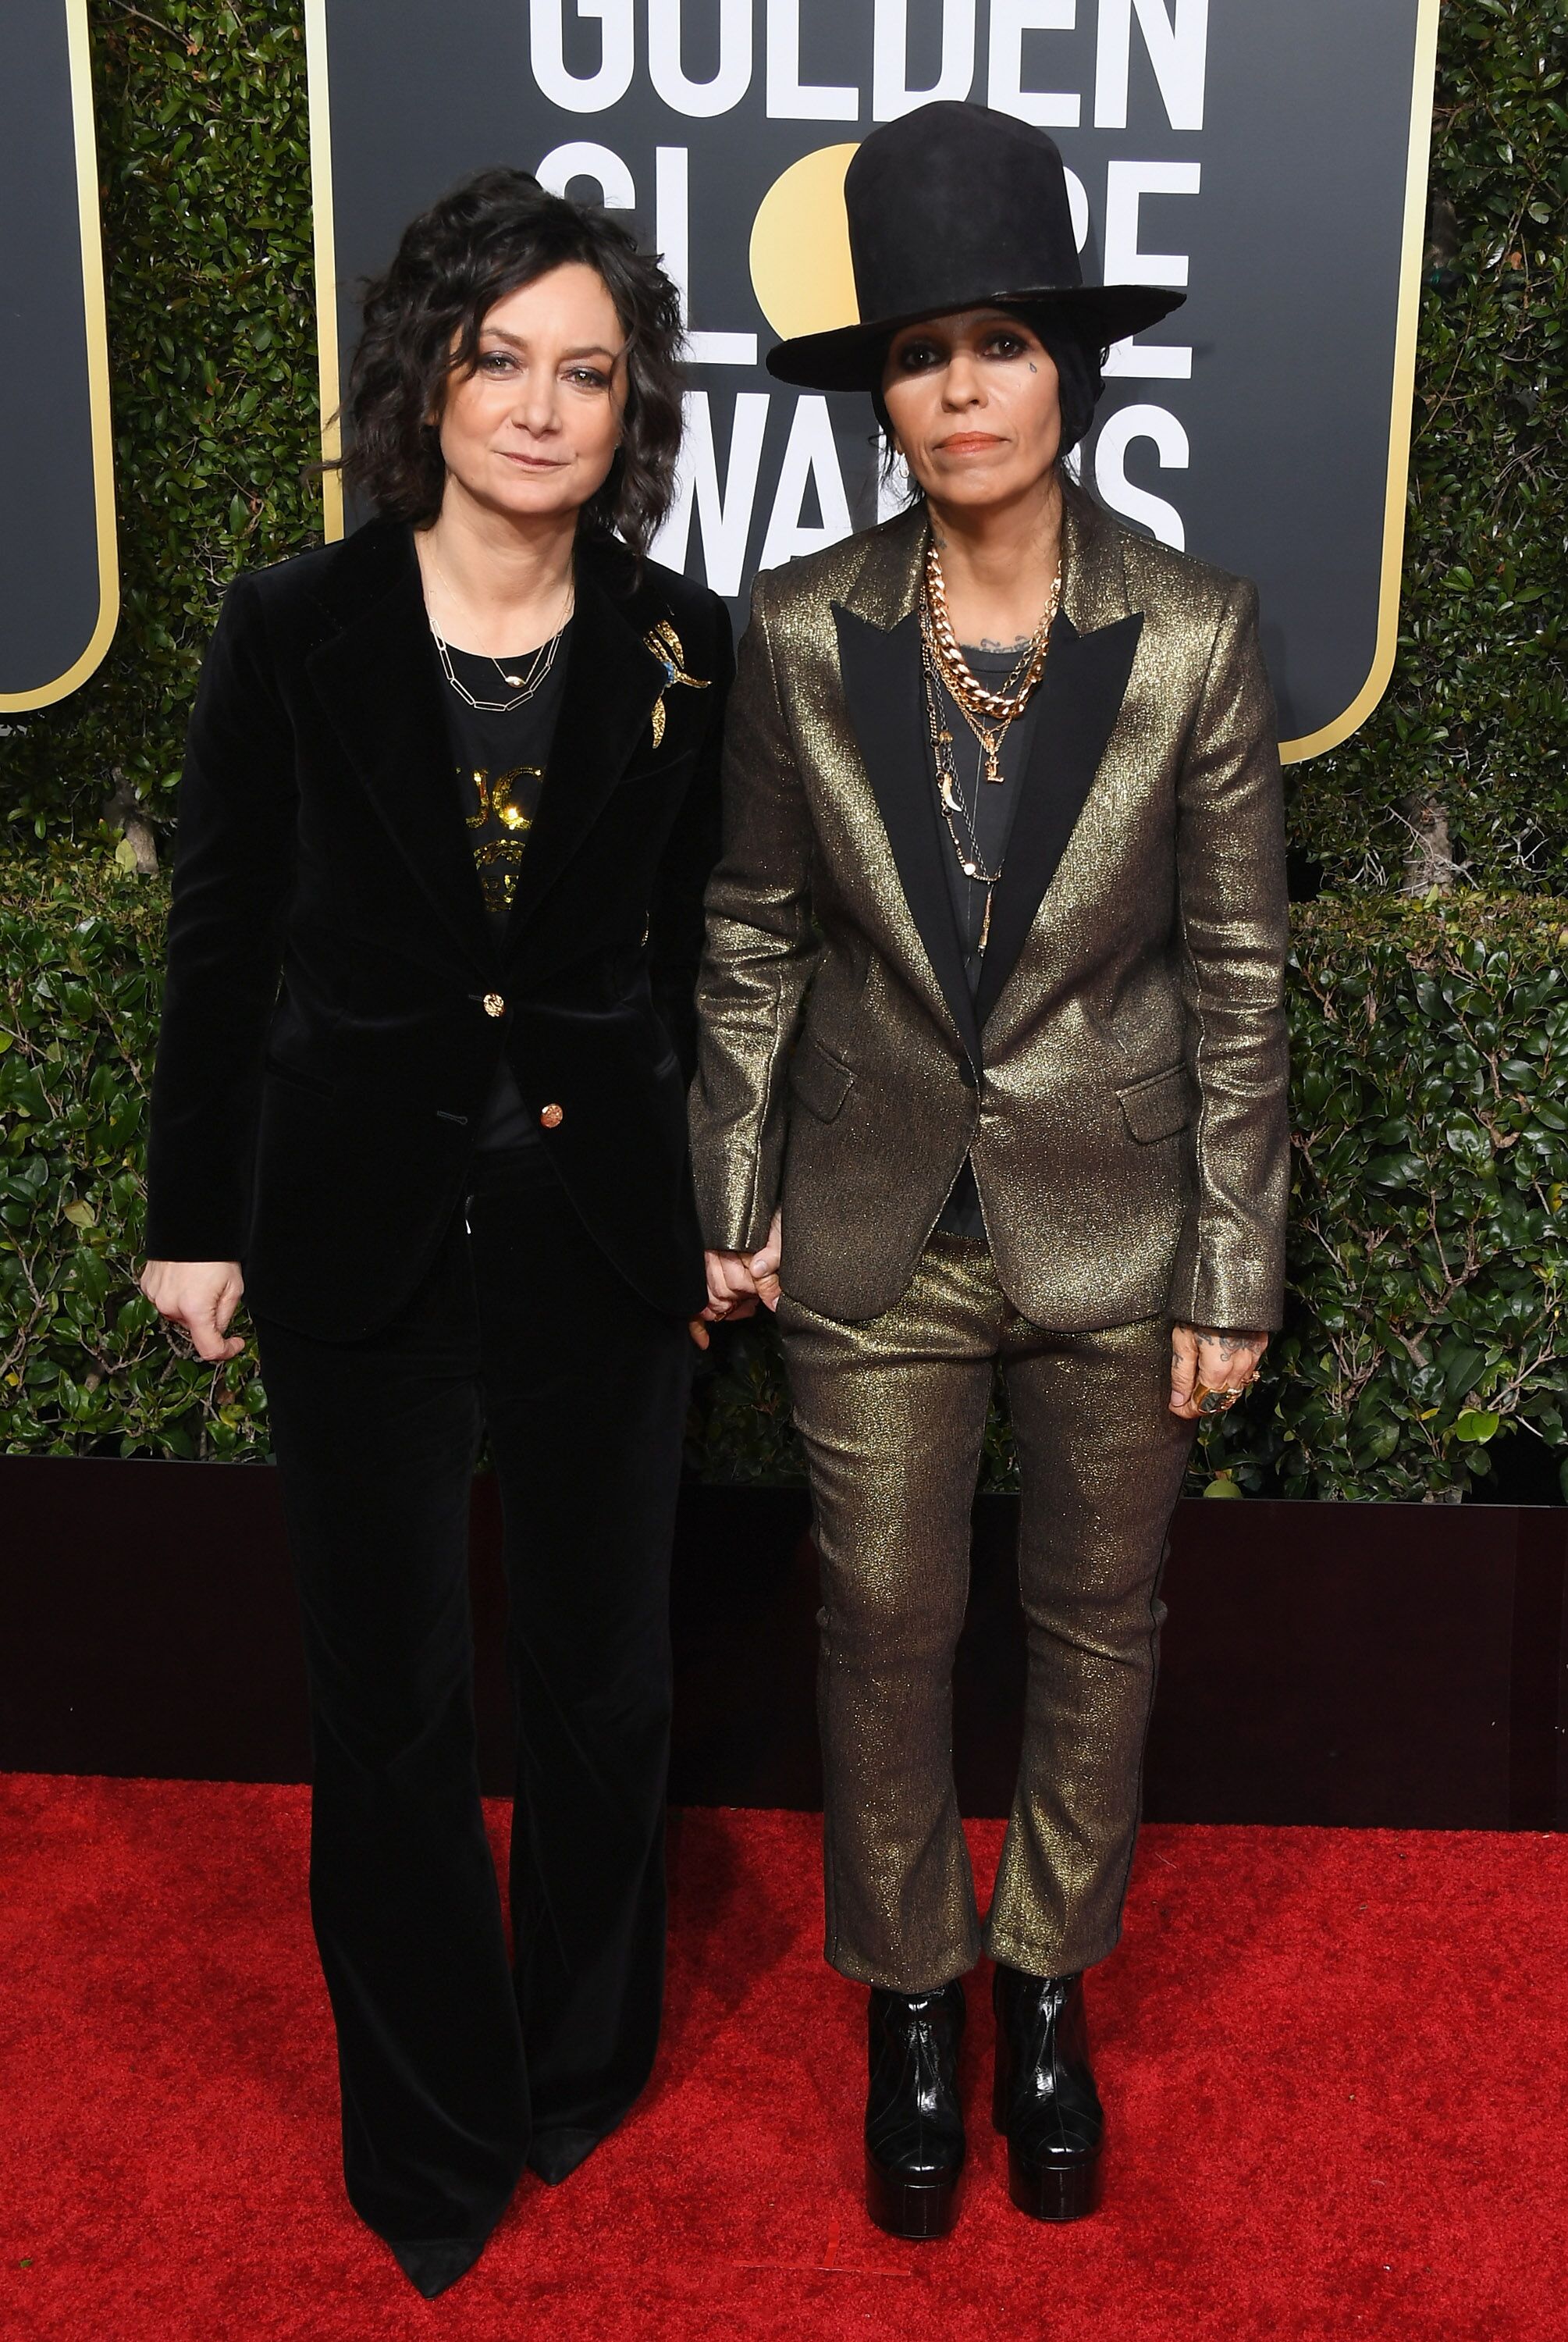 Sara GIlbert and Linda Perry at the Golden Globe Awards. | Source: Getty Images